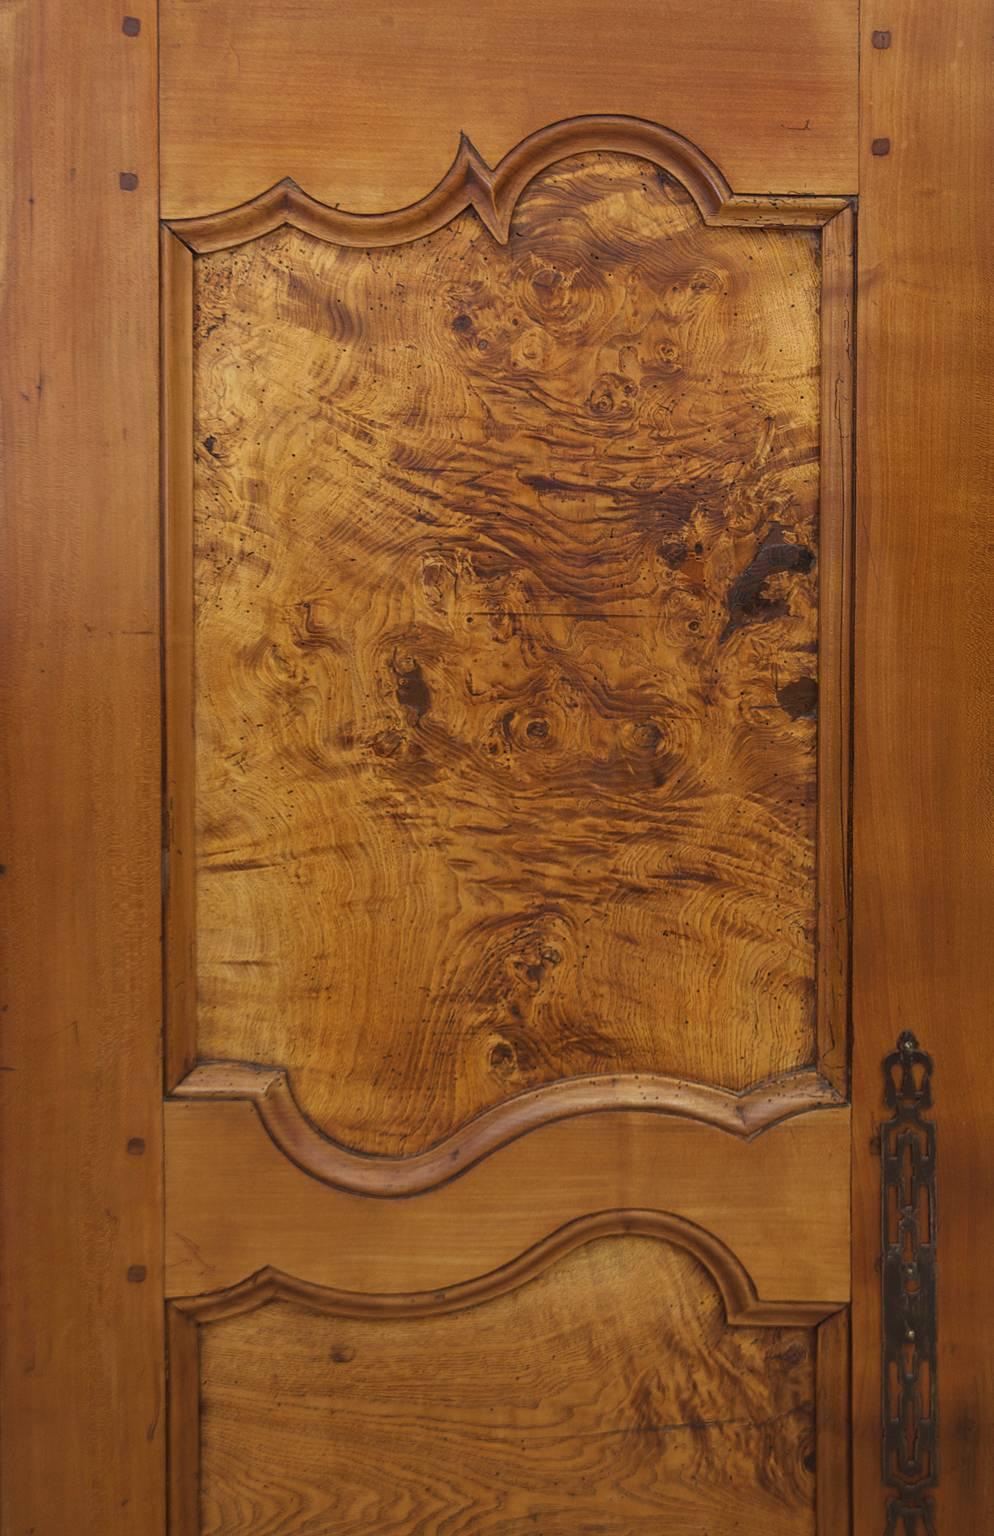 A French Armoire from Brittany in Walnut, Cherry and Oak, and Olive Ash Burl panels with mortise and peg construction, original lock, hardware and hinges, circa 1840.  Offers the potencial of ample storage for clothing, linens or as a cupboard or